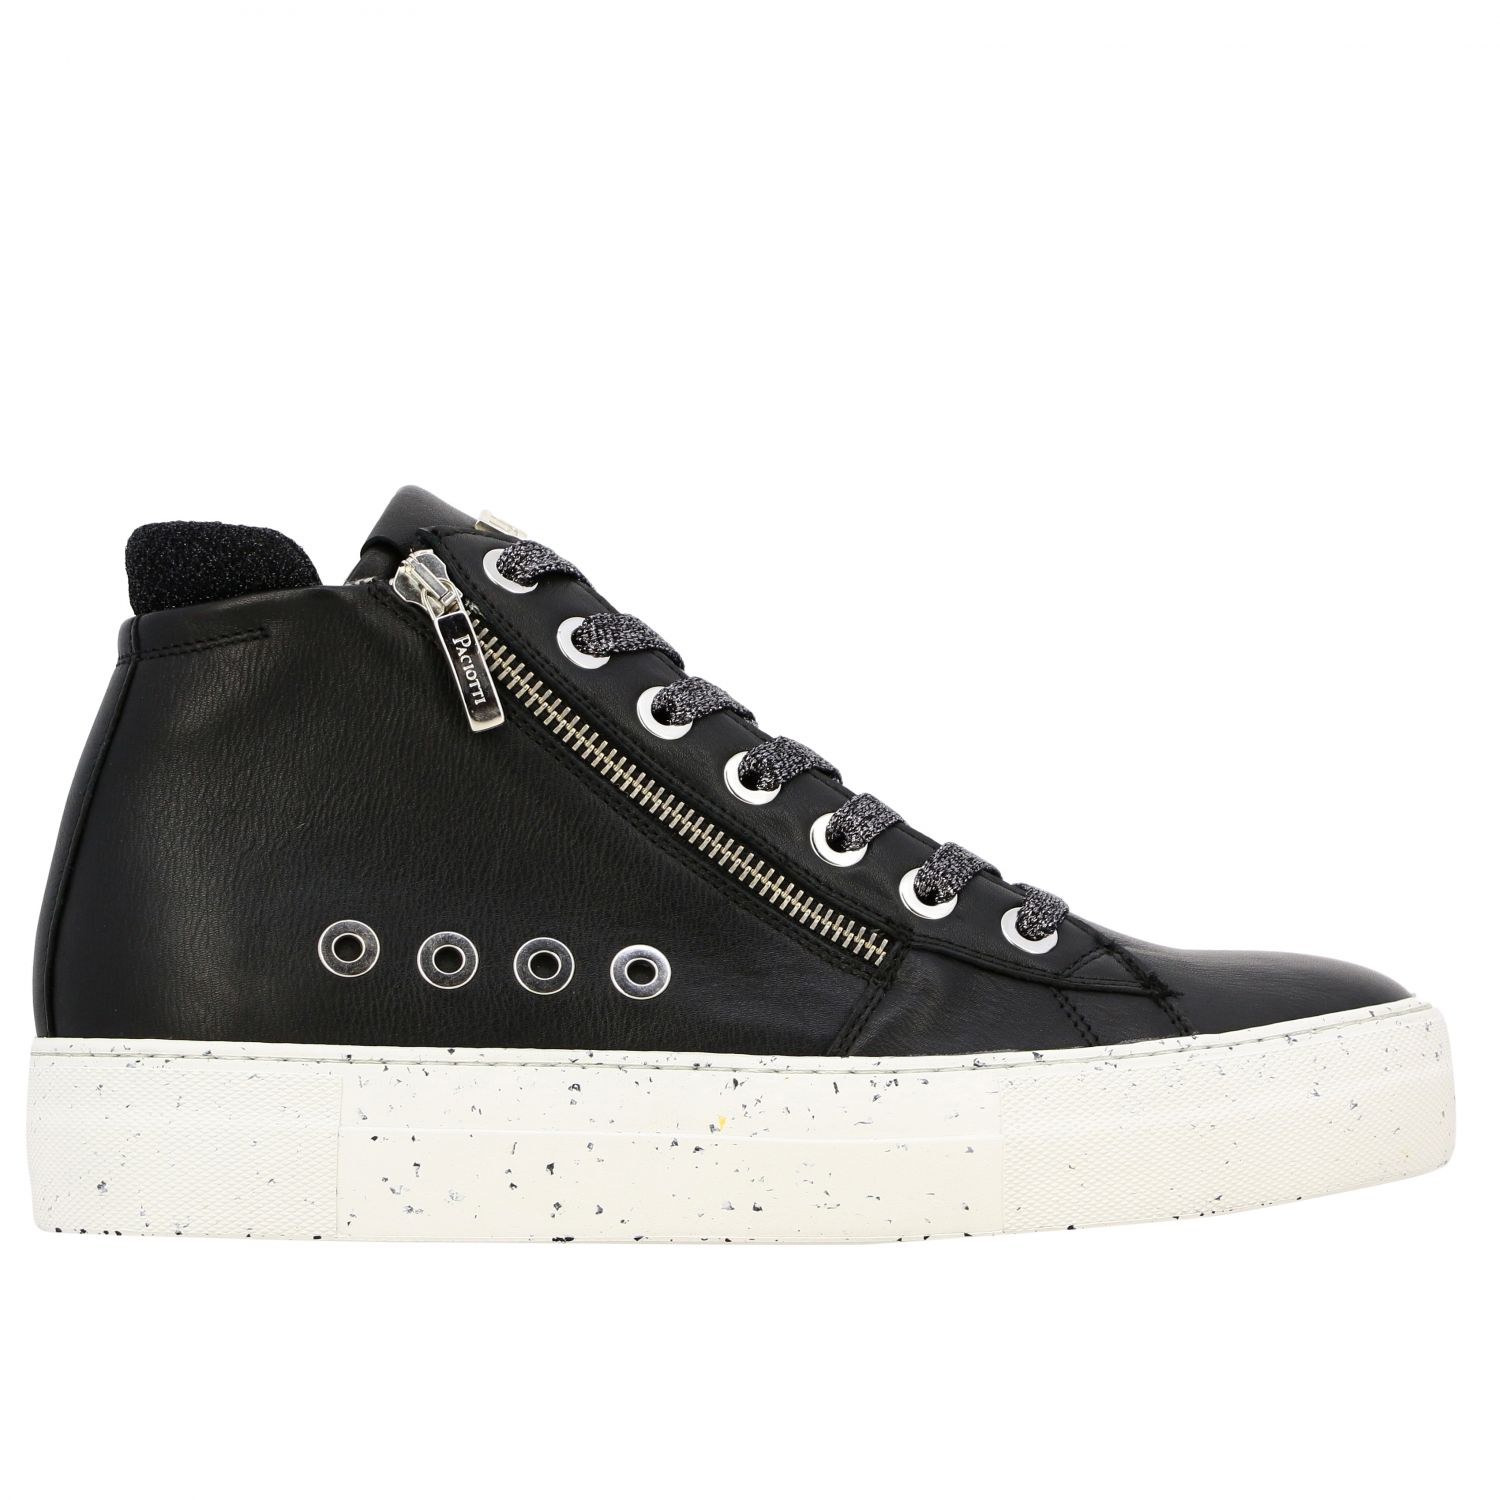 Ramones Paciotti 4US sneakers in leather with macro zip and logo | Sneakers  Paciotti 4Us Women Black | Sneakers Paciotti 4Us LD11TSZ Giglio EN